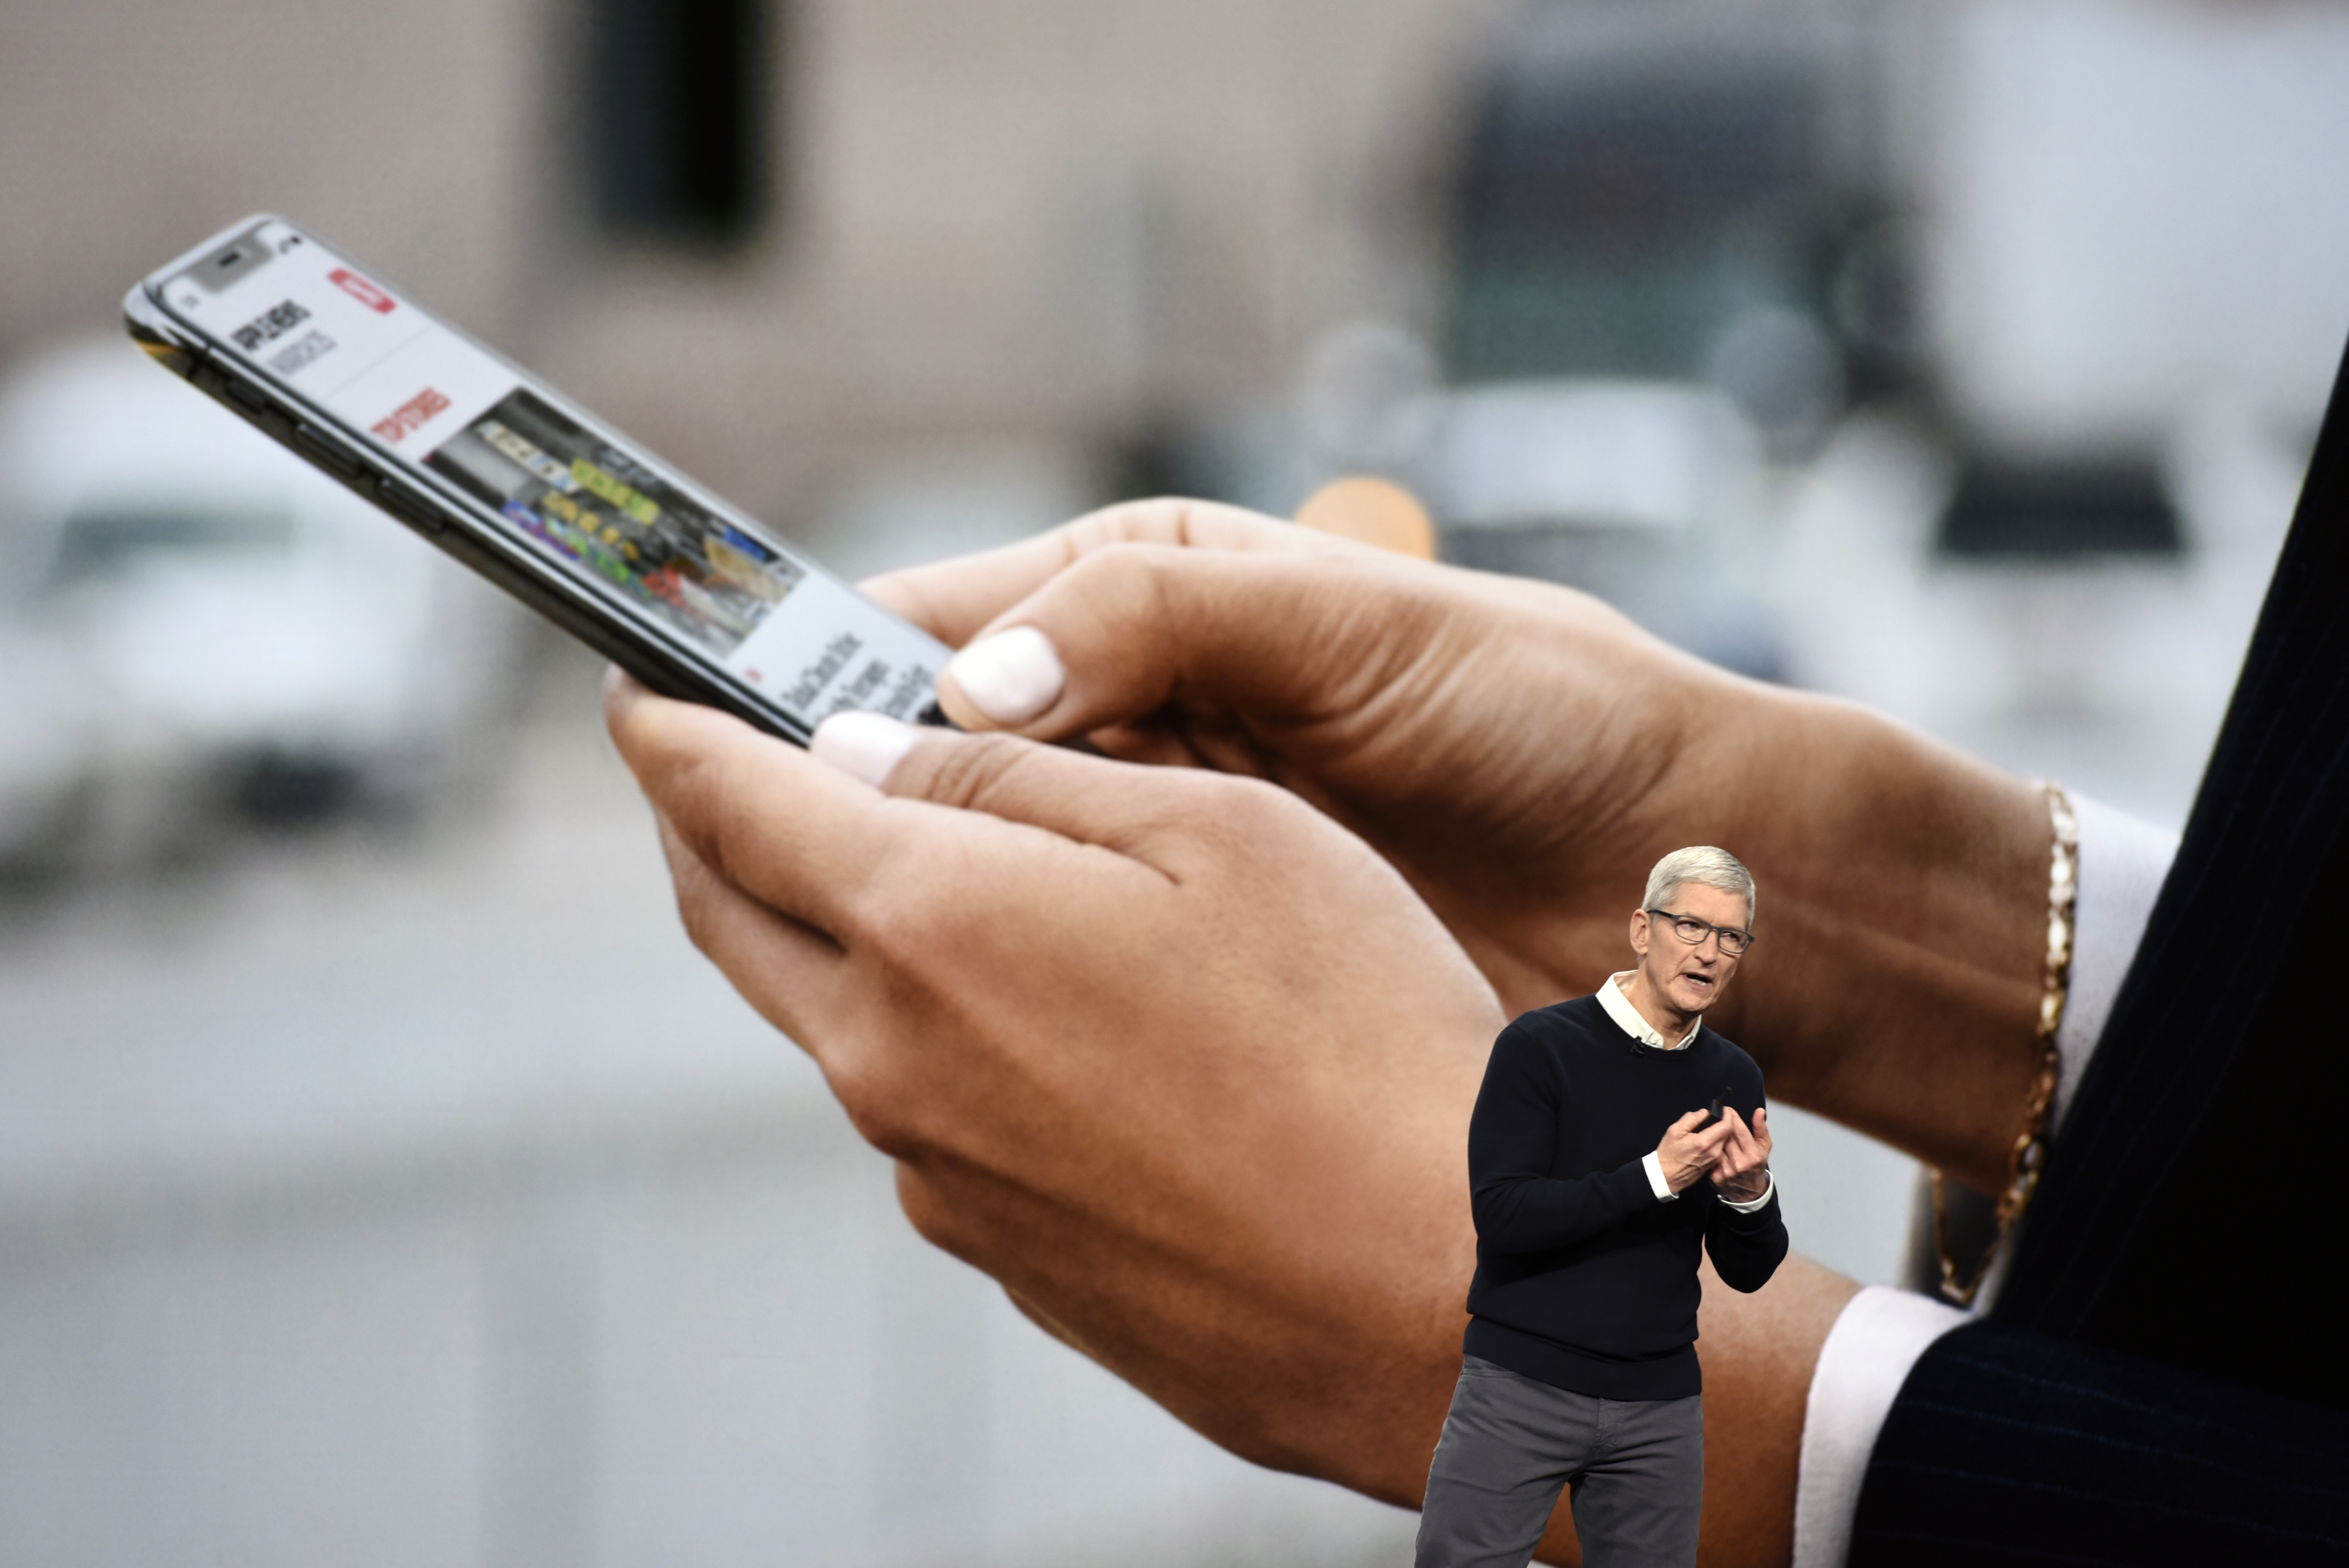 Apple CEO Tim Cook onstage in front of a wall-sized screen showing two hands holding an iPhone.